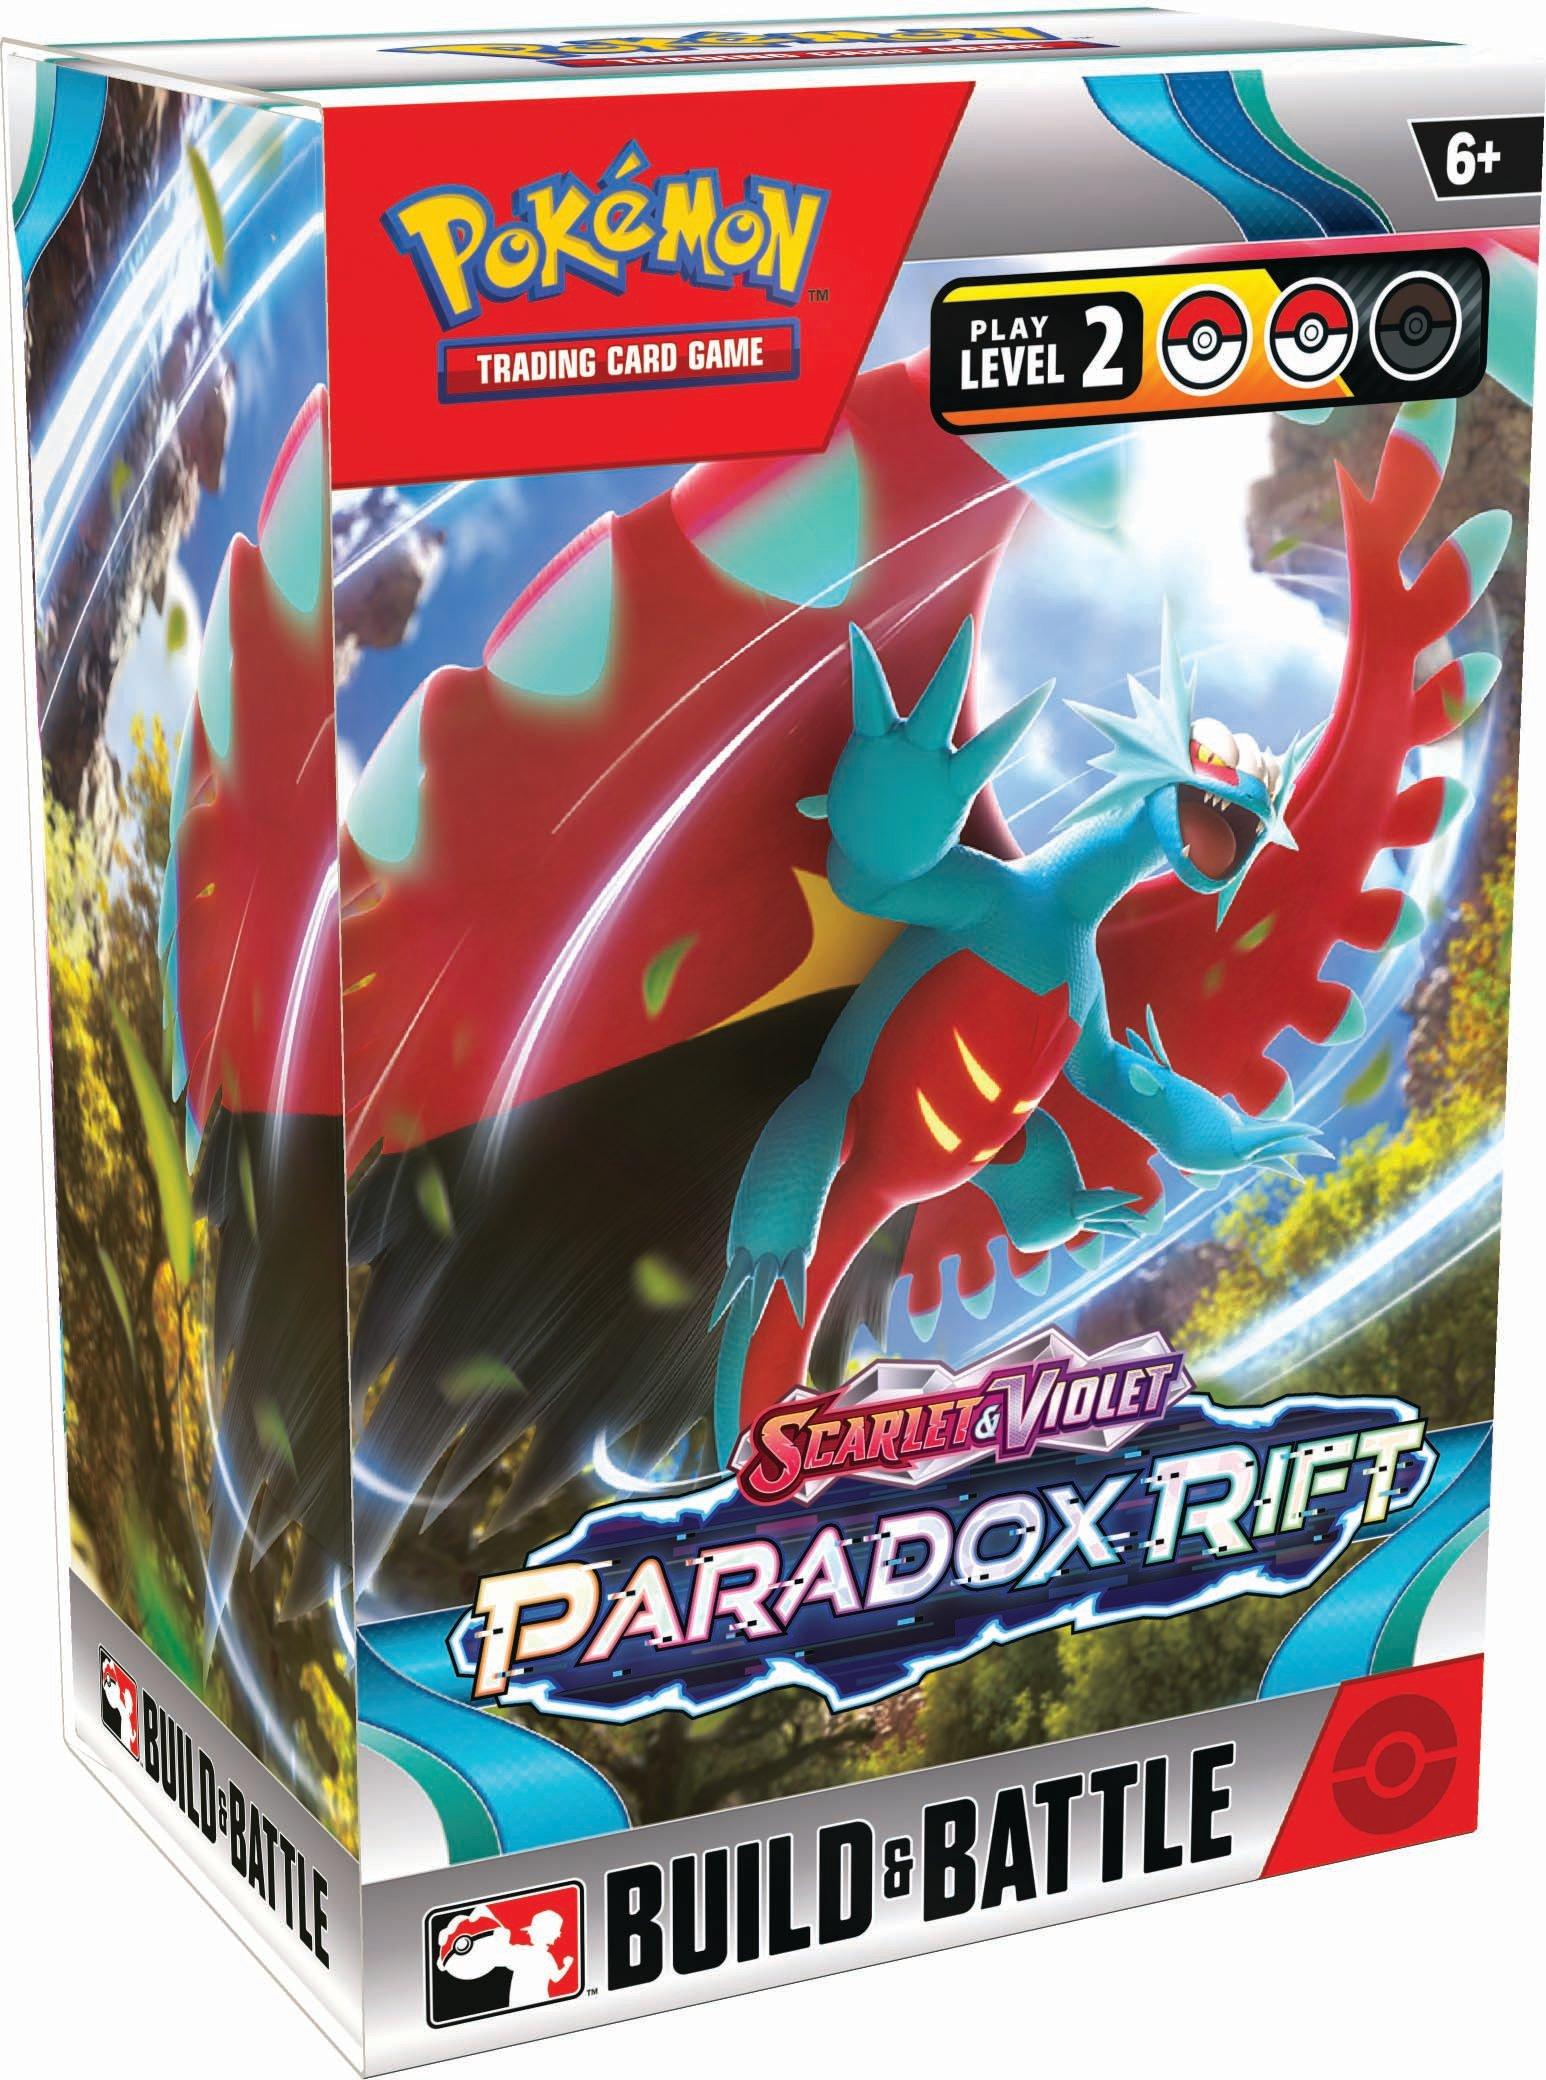 Pokemon Trading Card Game: Scarlet and Violet Paradox Rift Build and Battle Box